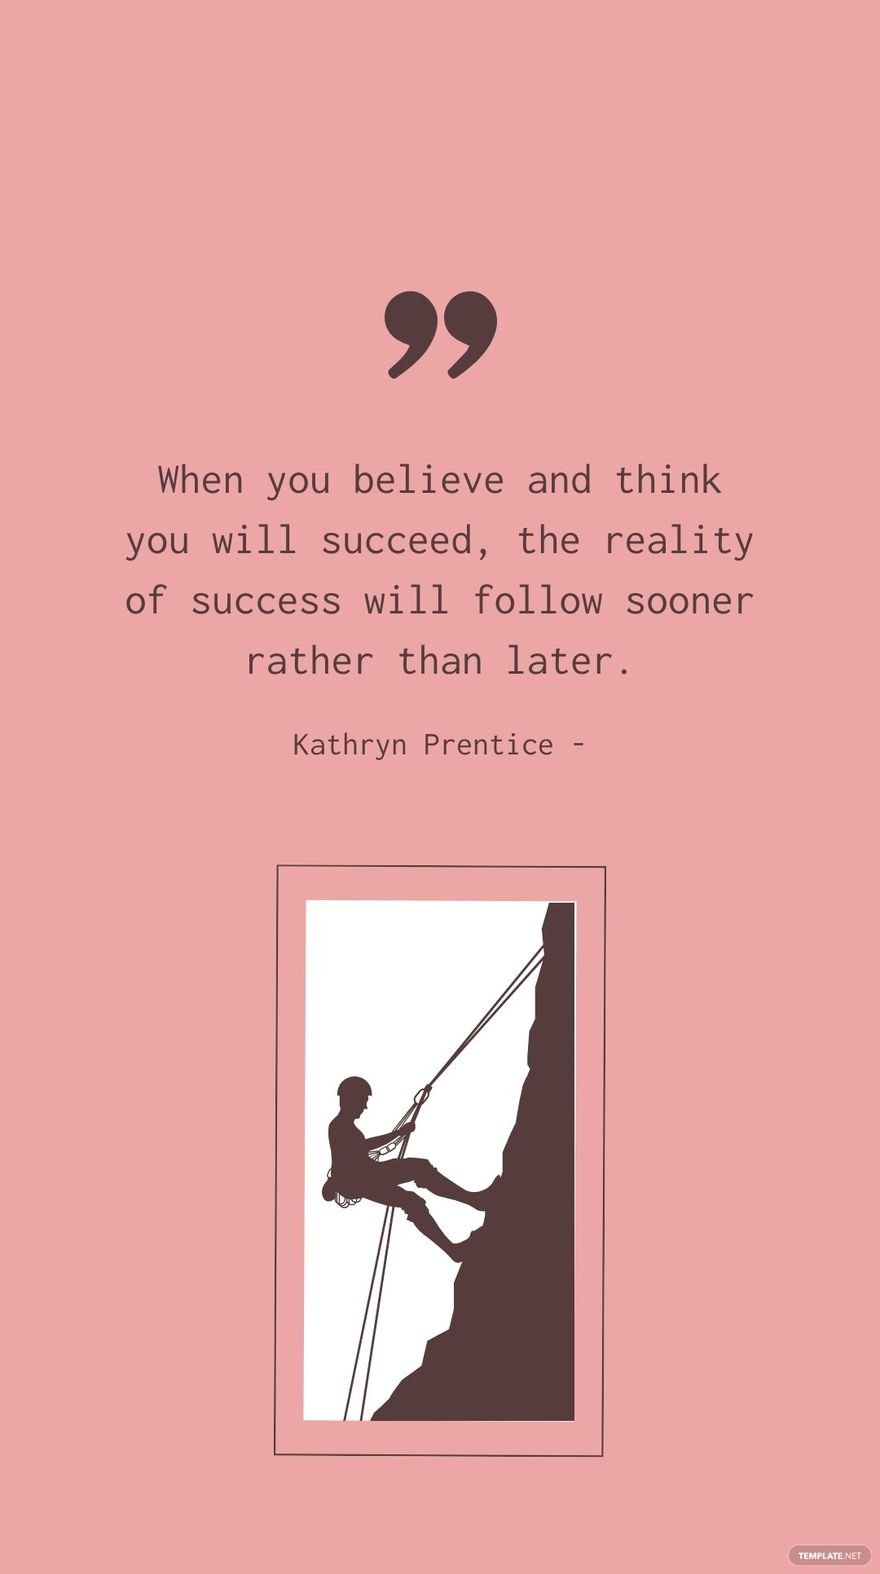 Free Kathryn Prentice - When you believe and think you will succeed, the reality of success will follow sooner rather than later. in JPG